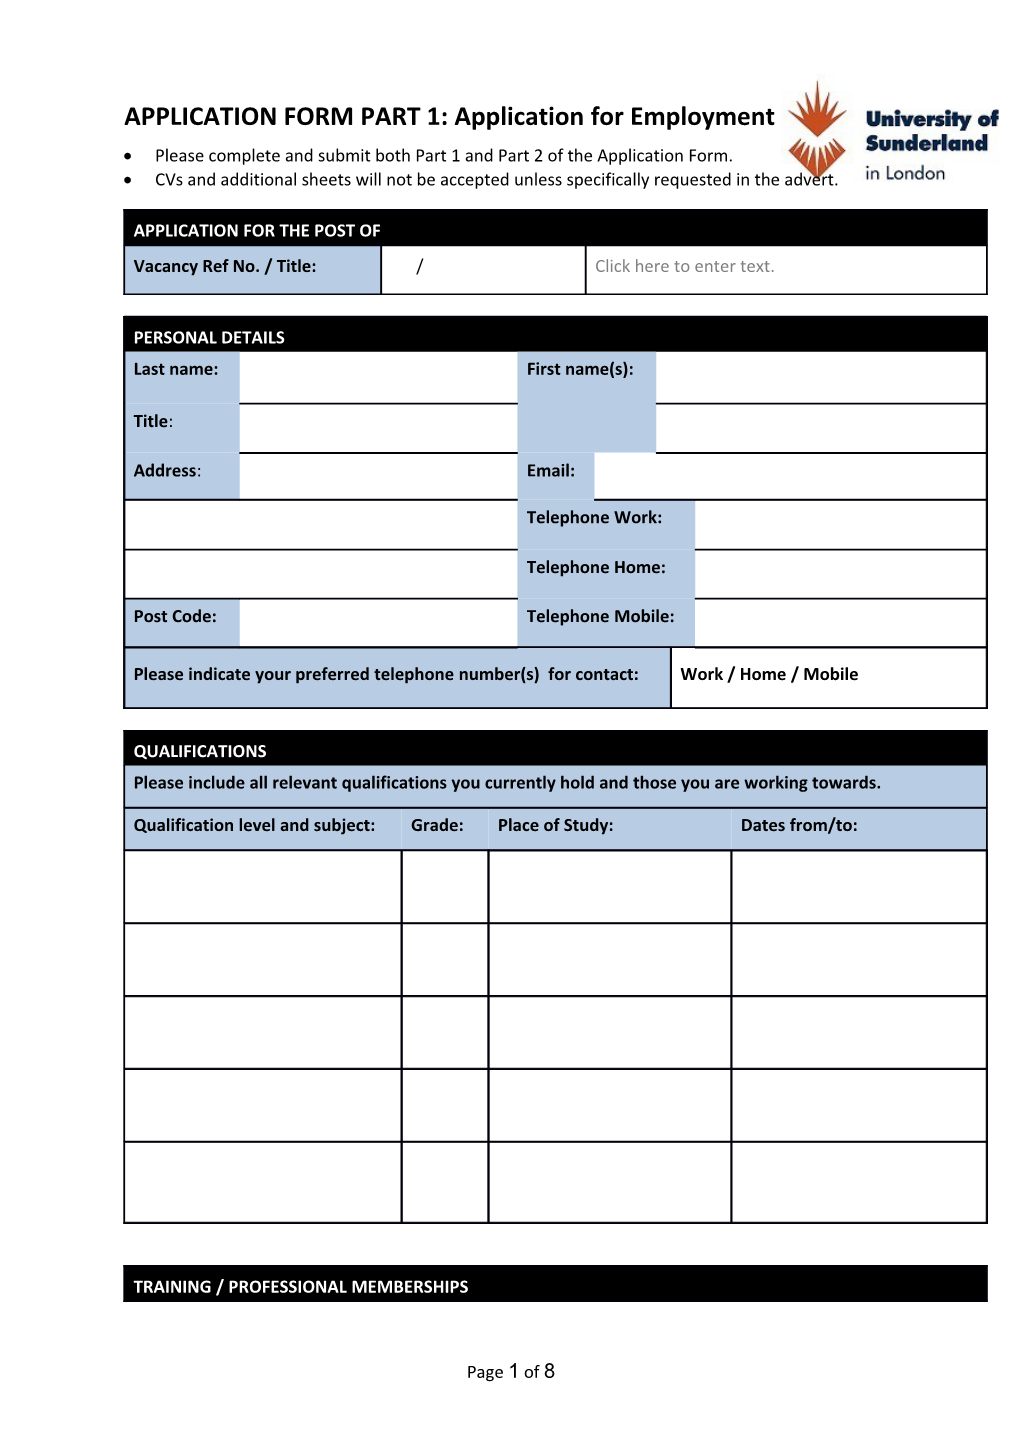 APPLICATION FORM PART 1: Application for Employment